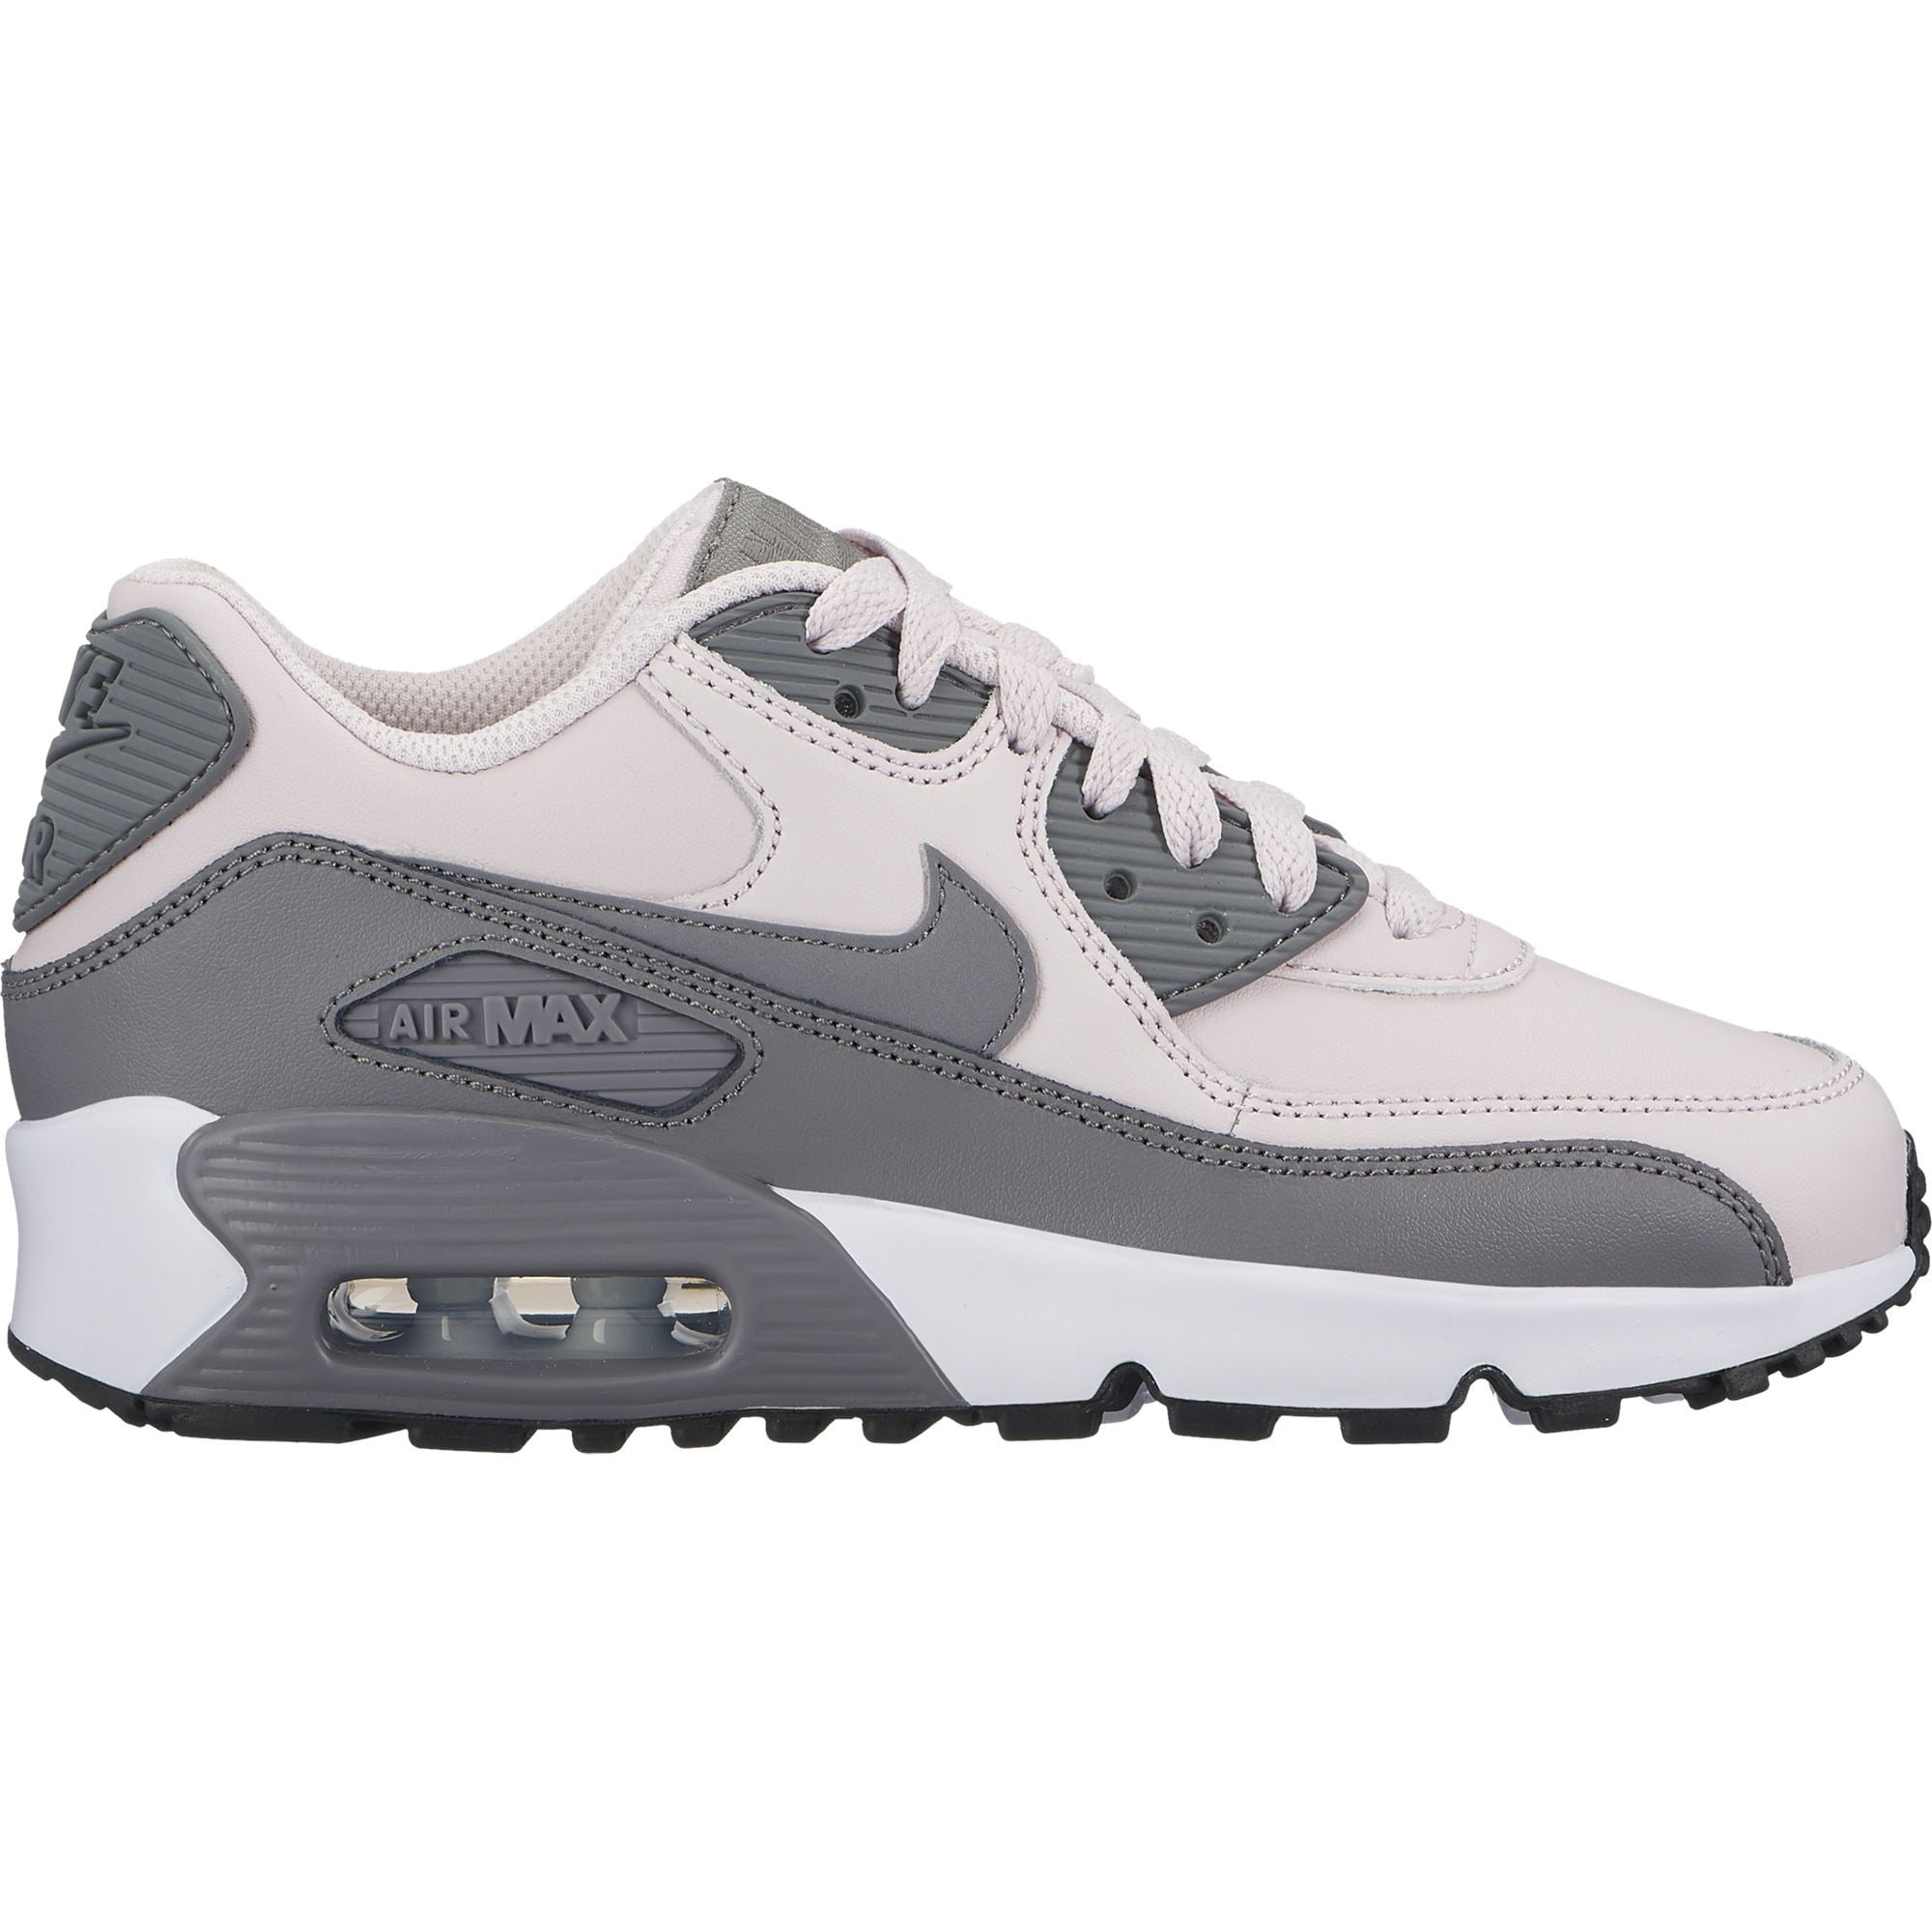 nike air max 90 ltr girl's shoe anthracite/ metallic silver-hot 